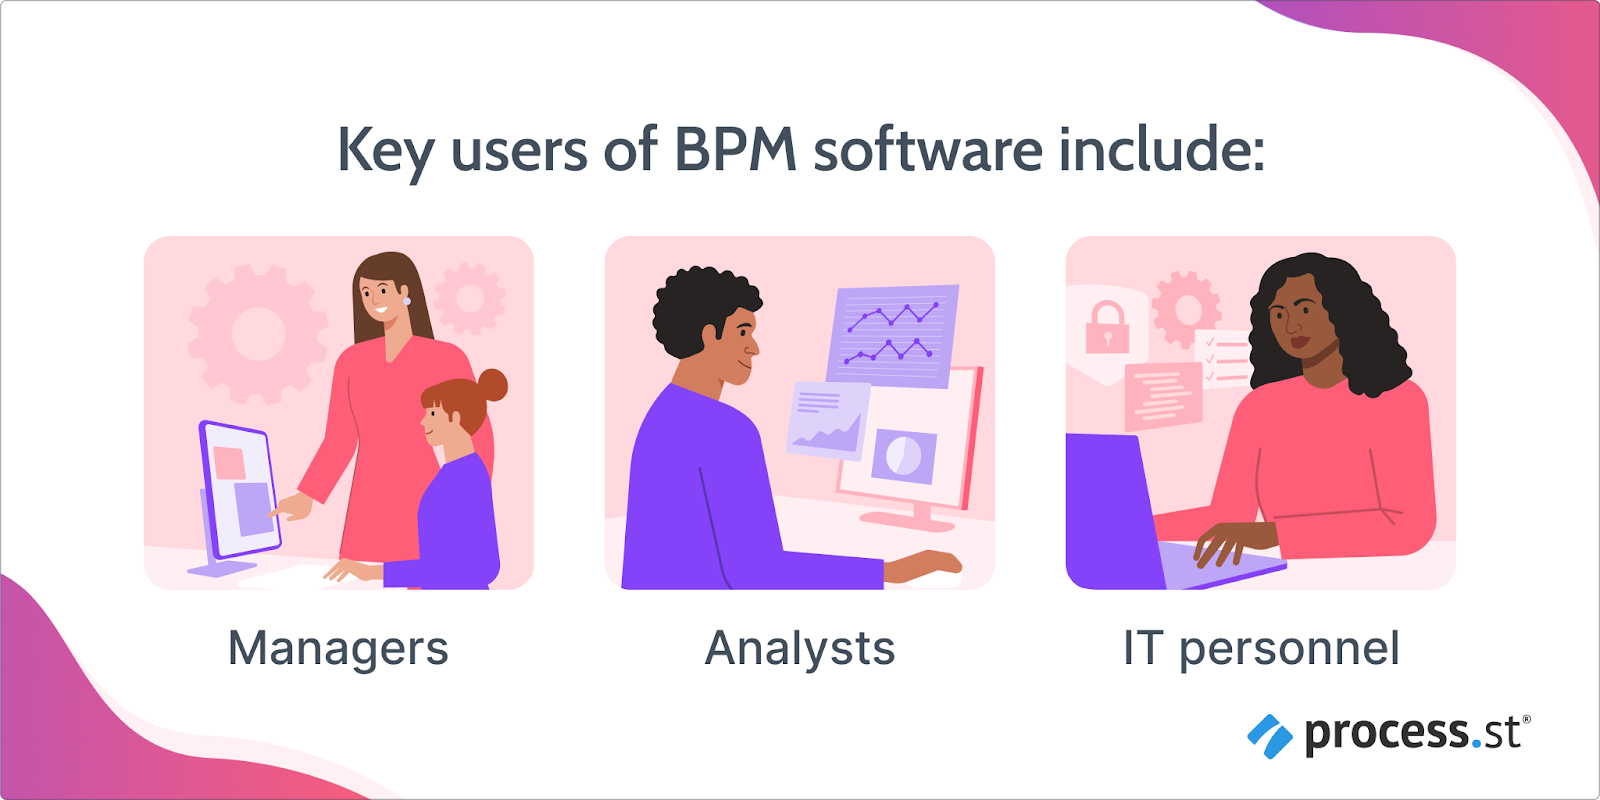 image showing the key users of bpm software